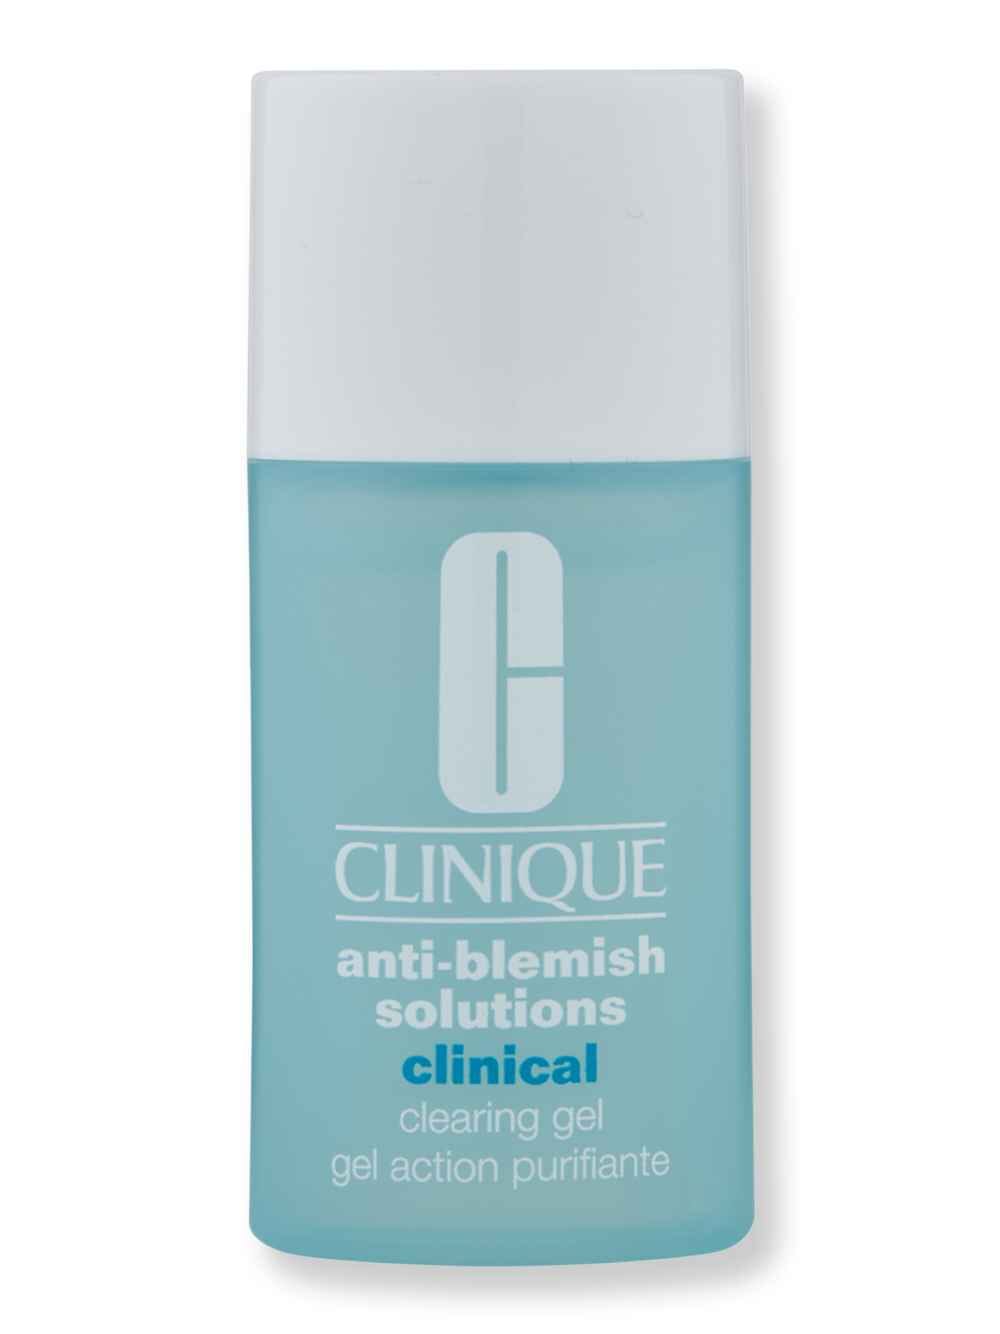 Clinique Clinique Anti-Blemish Solutions Clinical Clearing Gel 30 ml Face Cleansers 